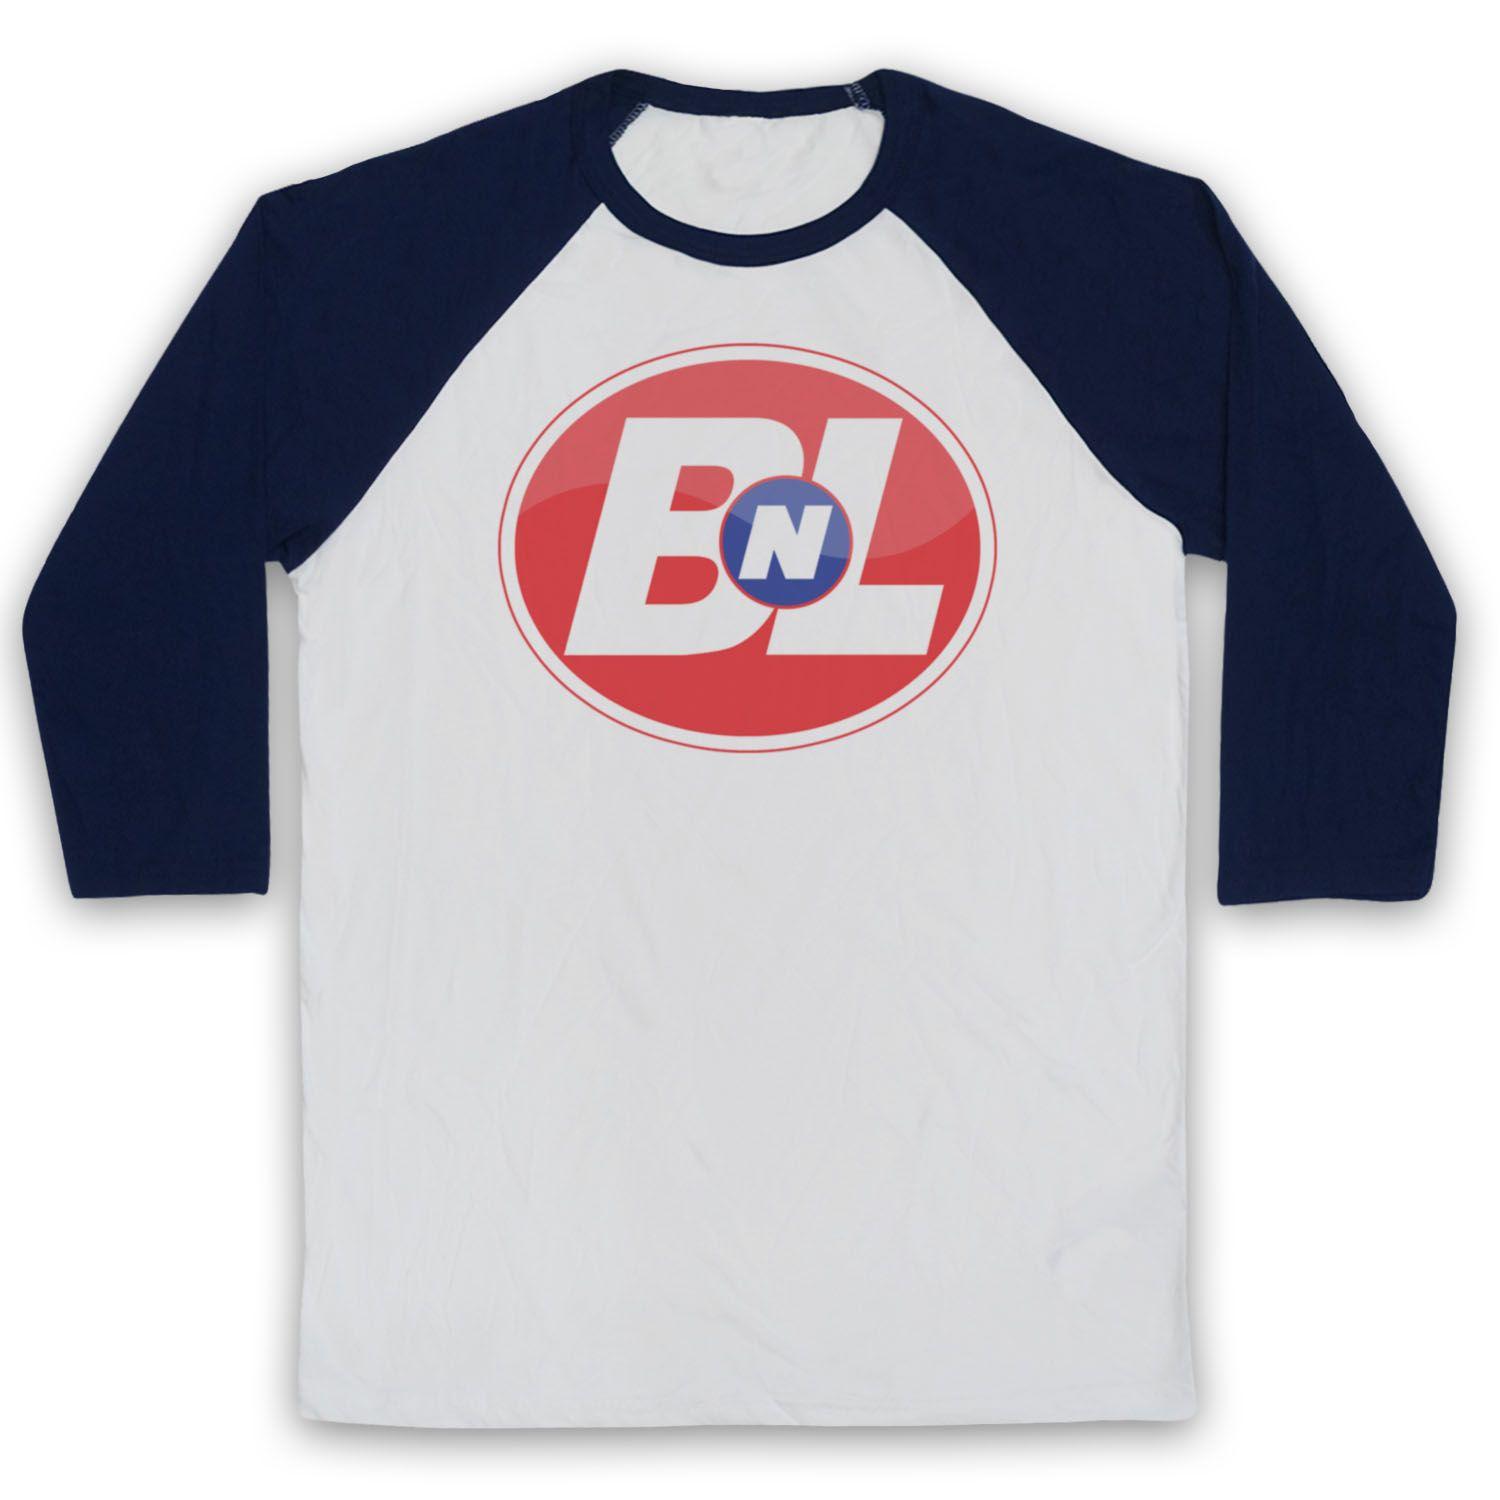 Blue and White E Logo - BUY N LARGE UNOFFICIAL WALL-E LOGO SCI FI KIDS FILM 3/4 SLEEVE ...